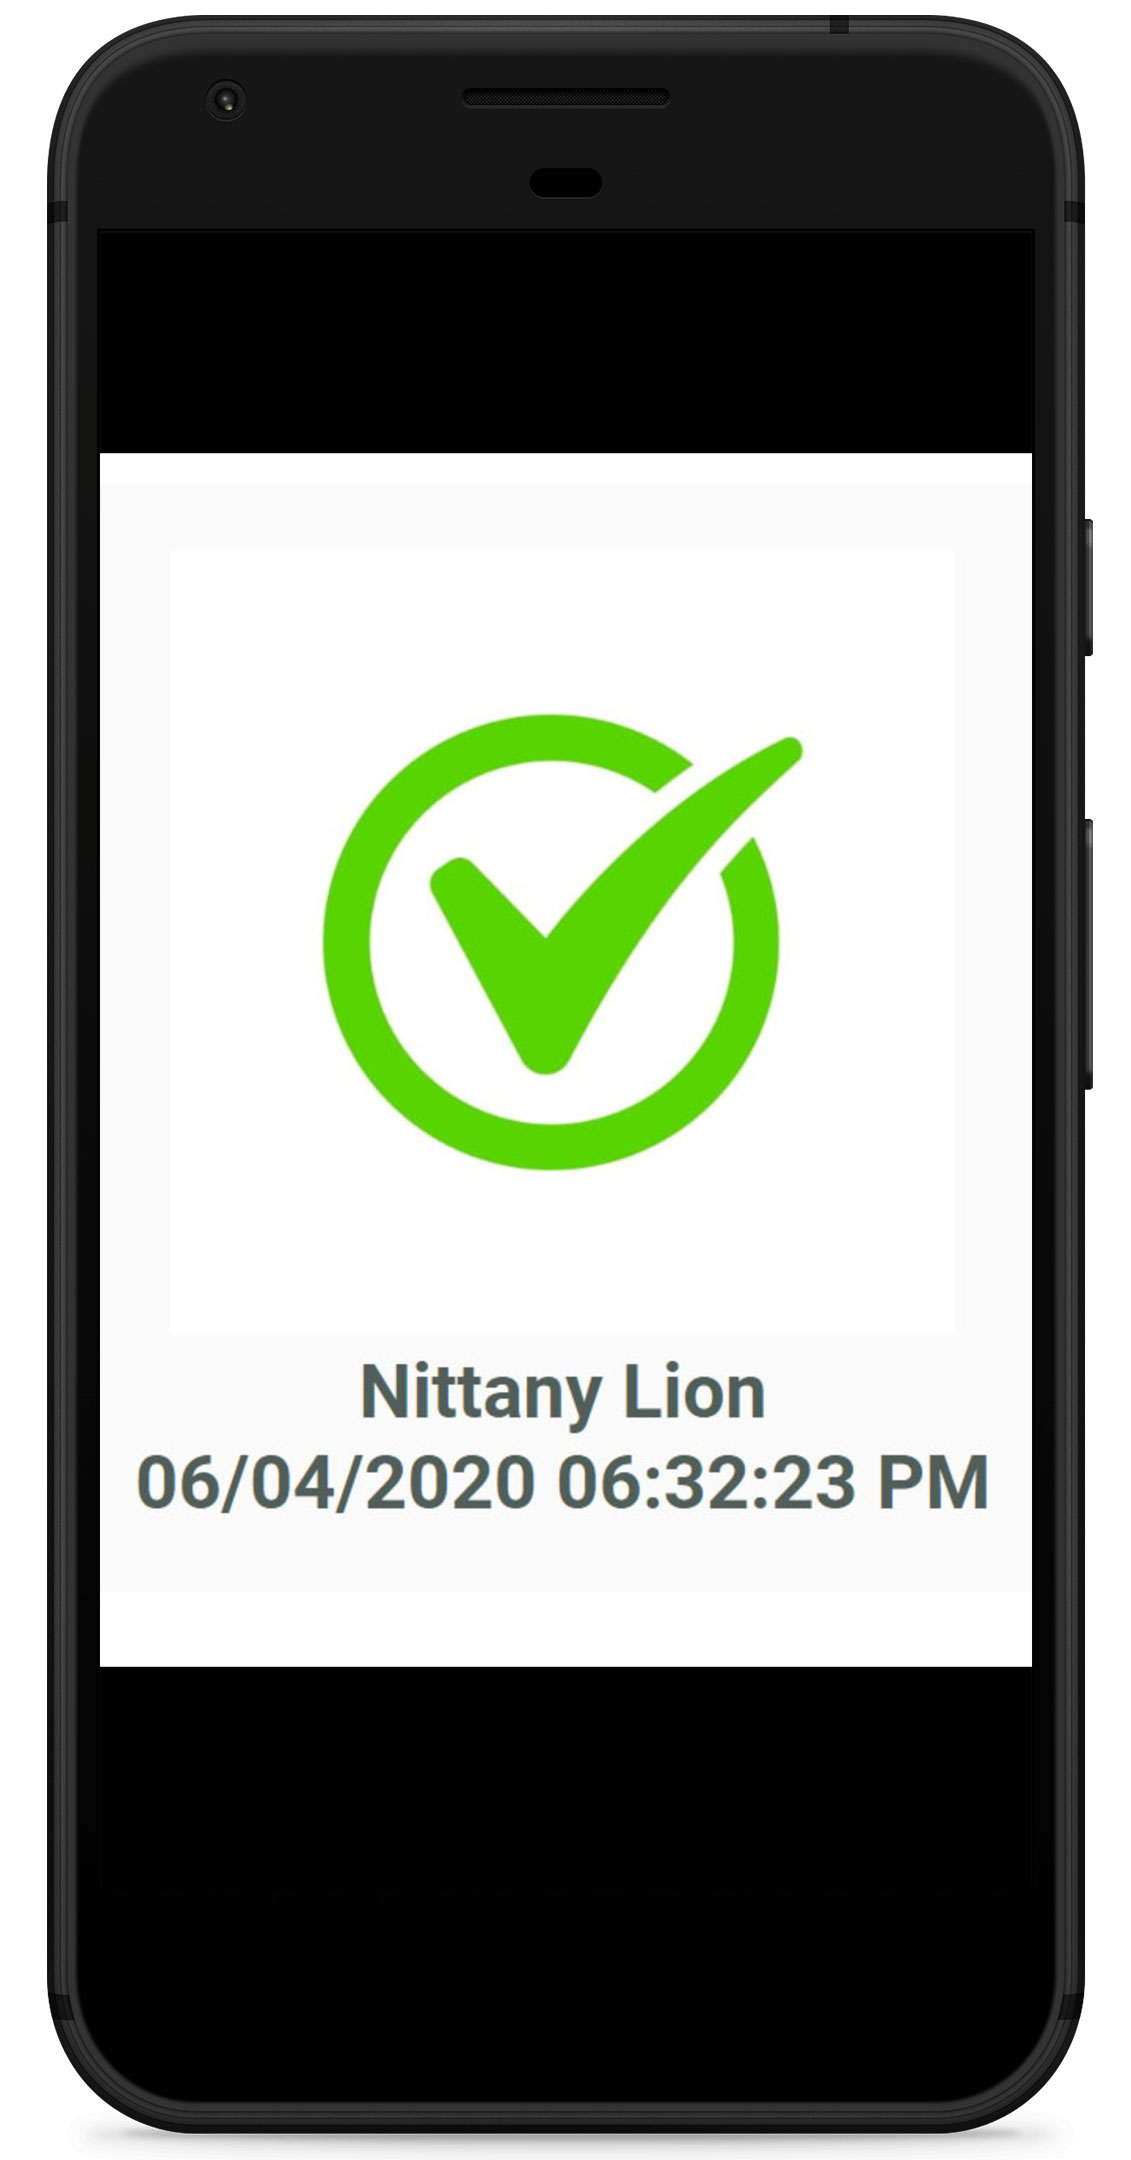 An image shows a phone screen with a large checkmark, name and timestamp. The name displayed is Nittany Lion.